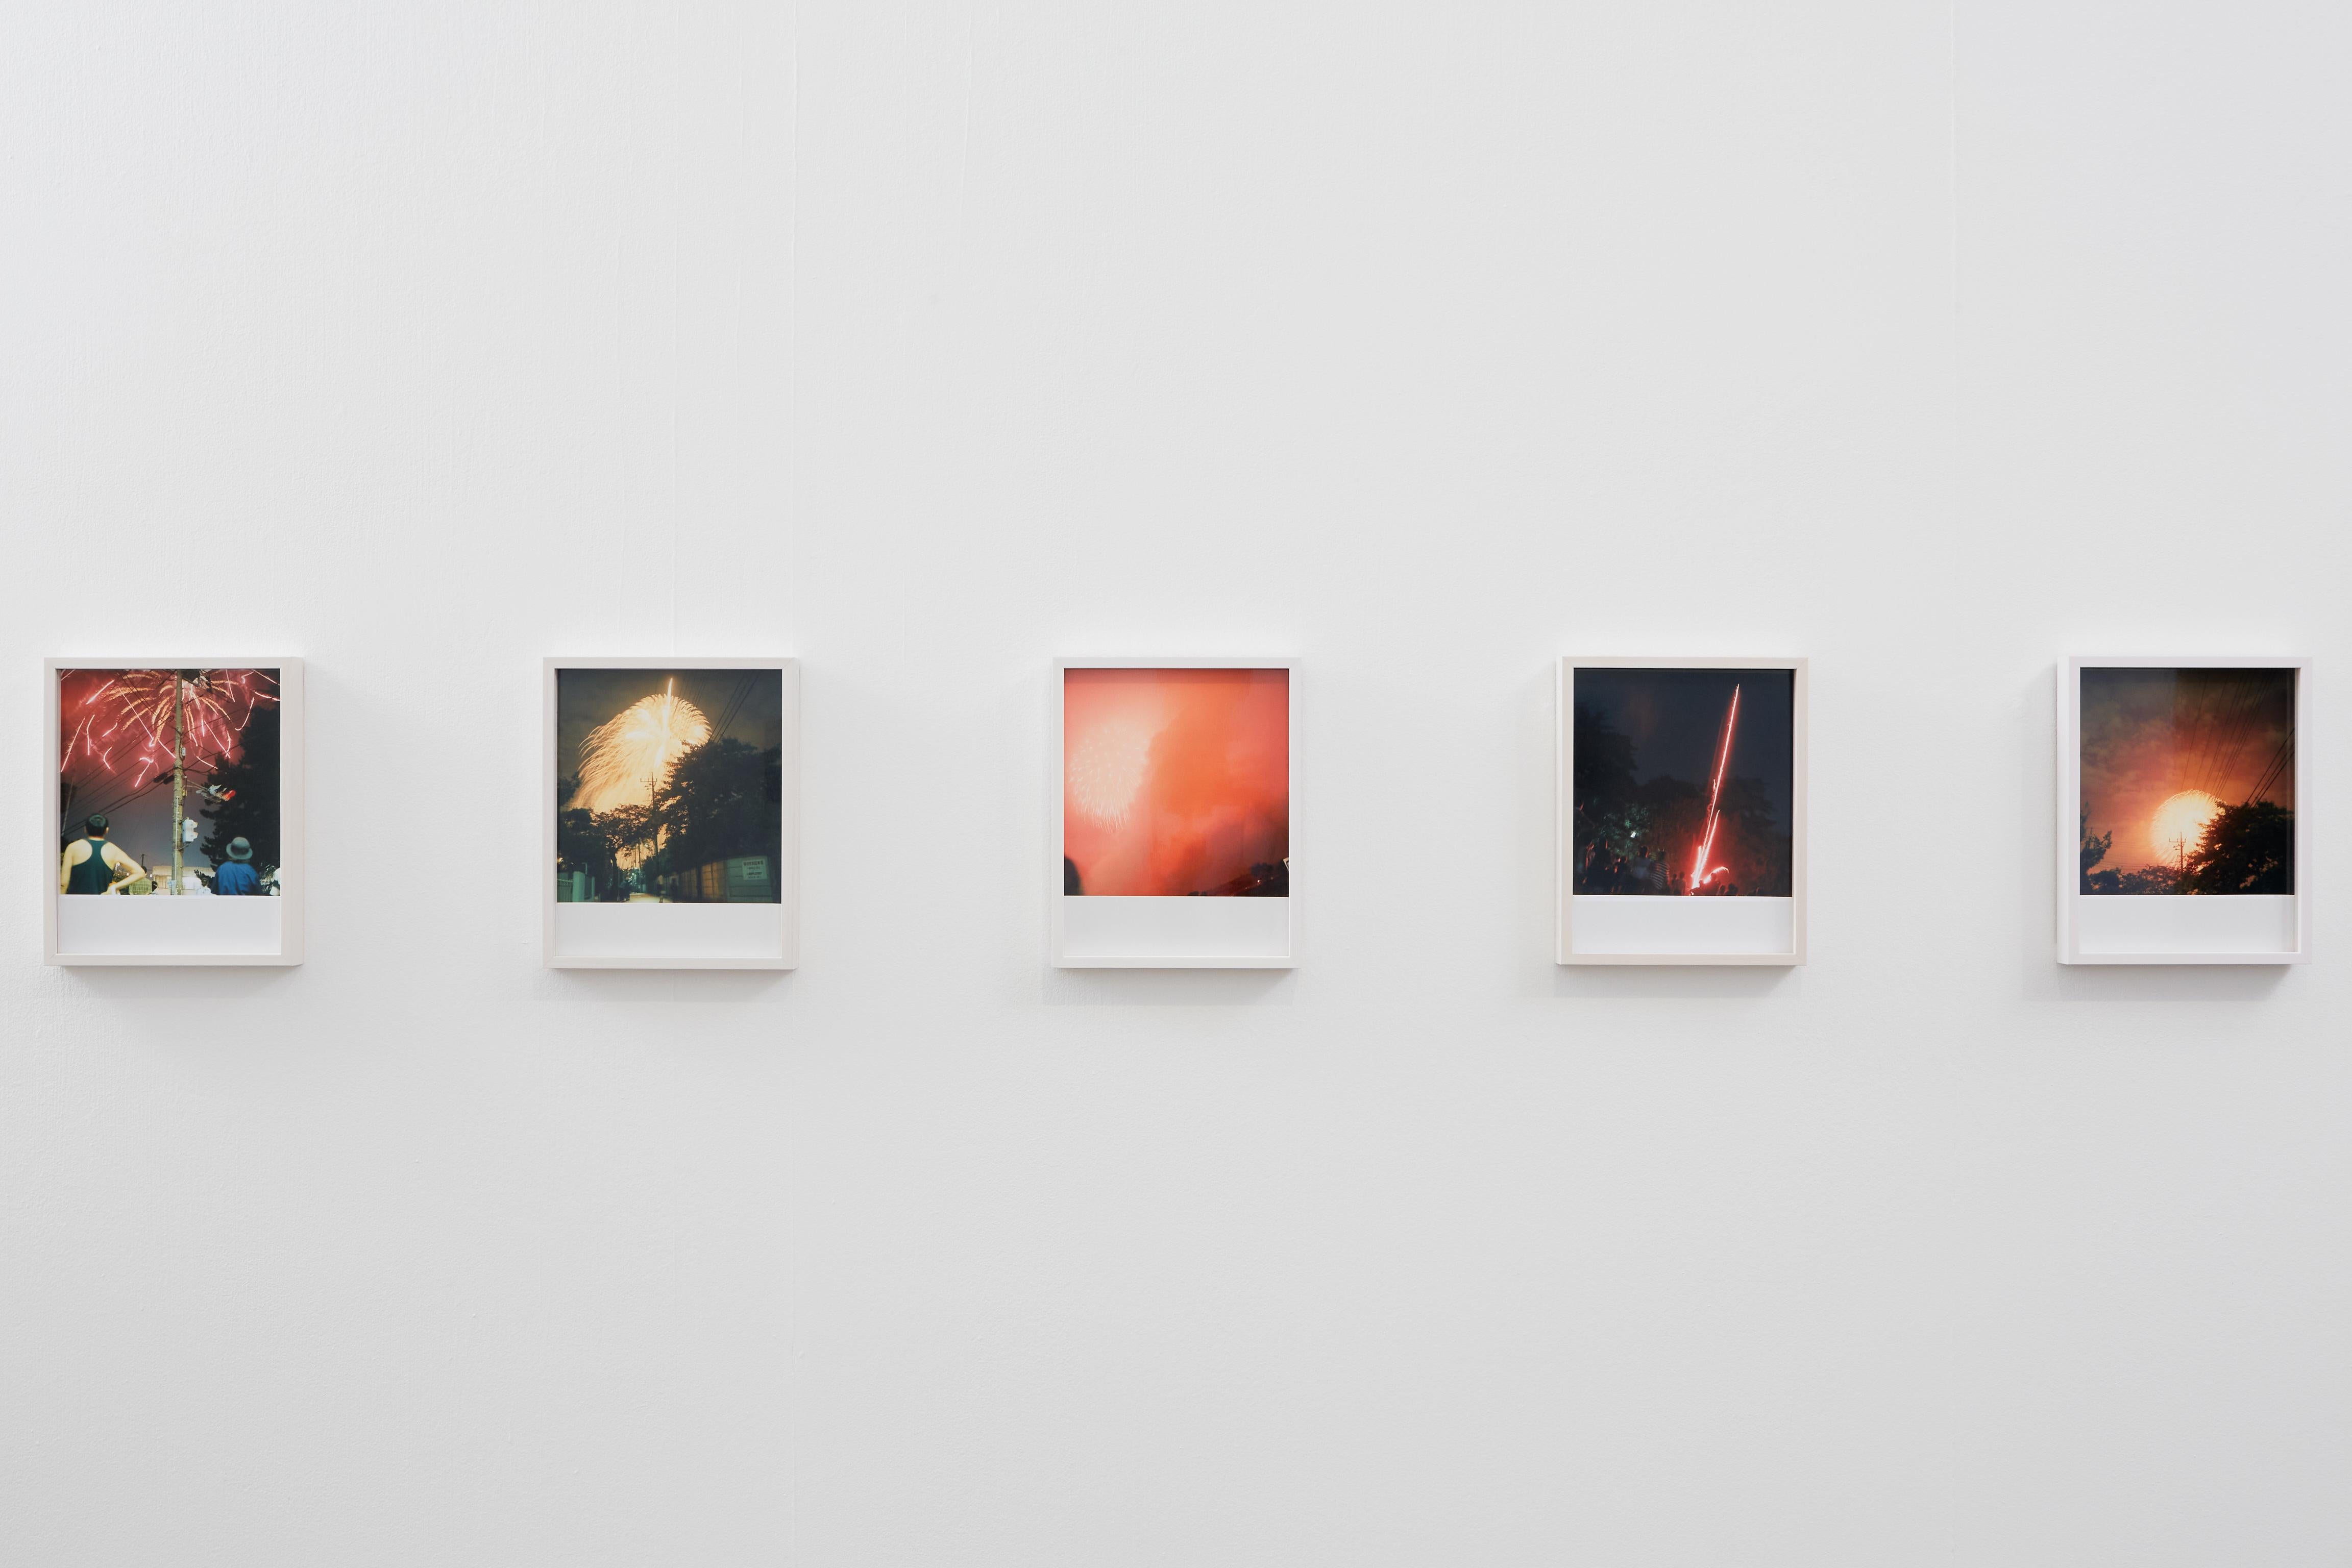 RINKO KAWAUCHI (*1972, Japan)
Untitled, from the series 'Hanabi'
2001
C–type print
Sheet 25.4 x 20.3  cm (10 x 8 in.)
Edition of 6; Ed. no. 3/6 
framed only 

Reminiscent of Japanese photography of the 1960s Rinko Kawauchi’s work is the search for